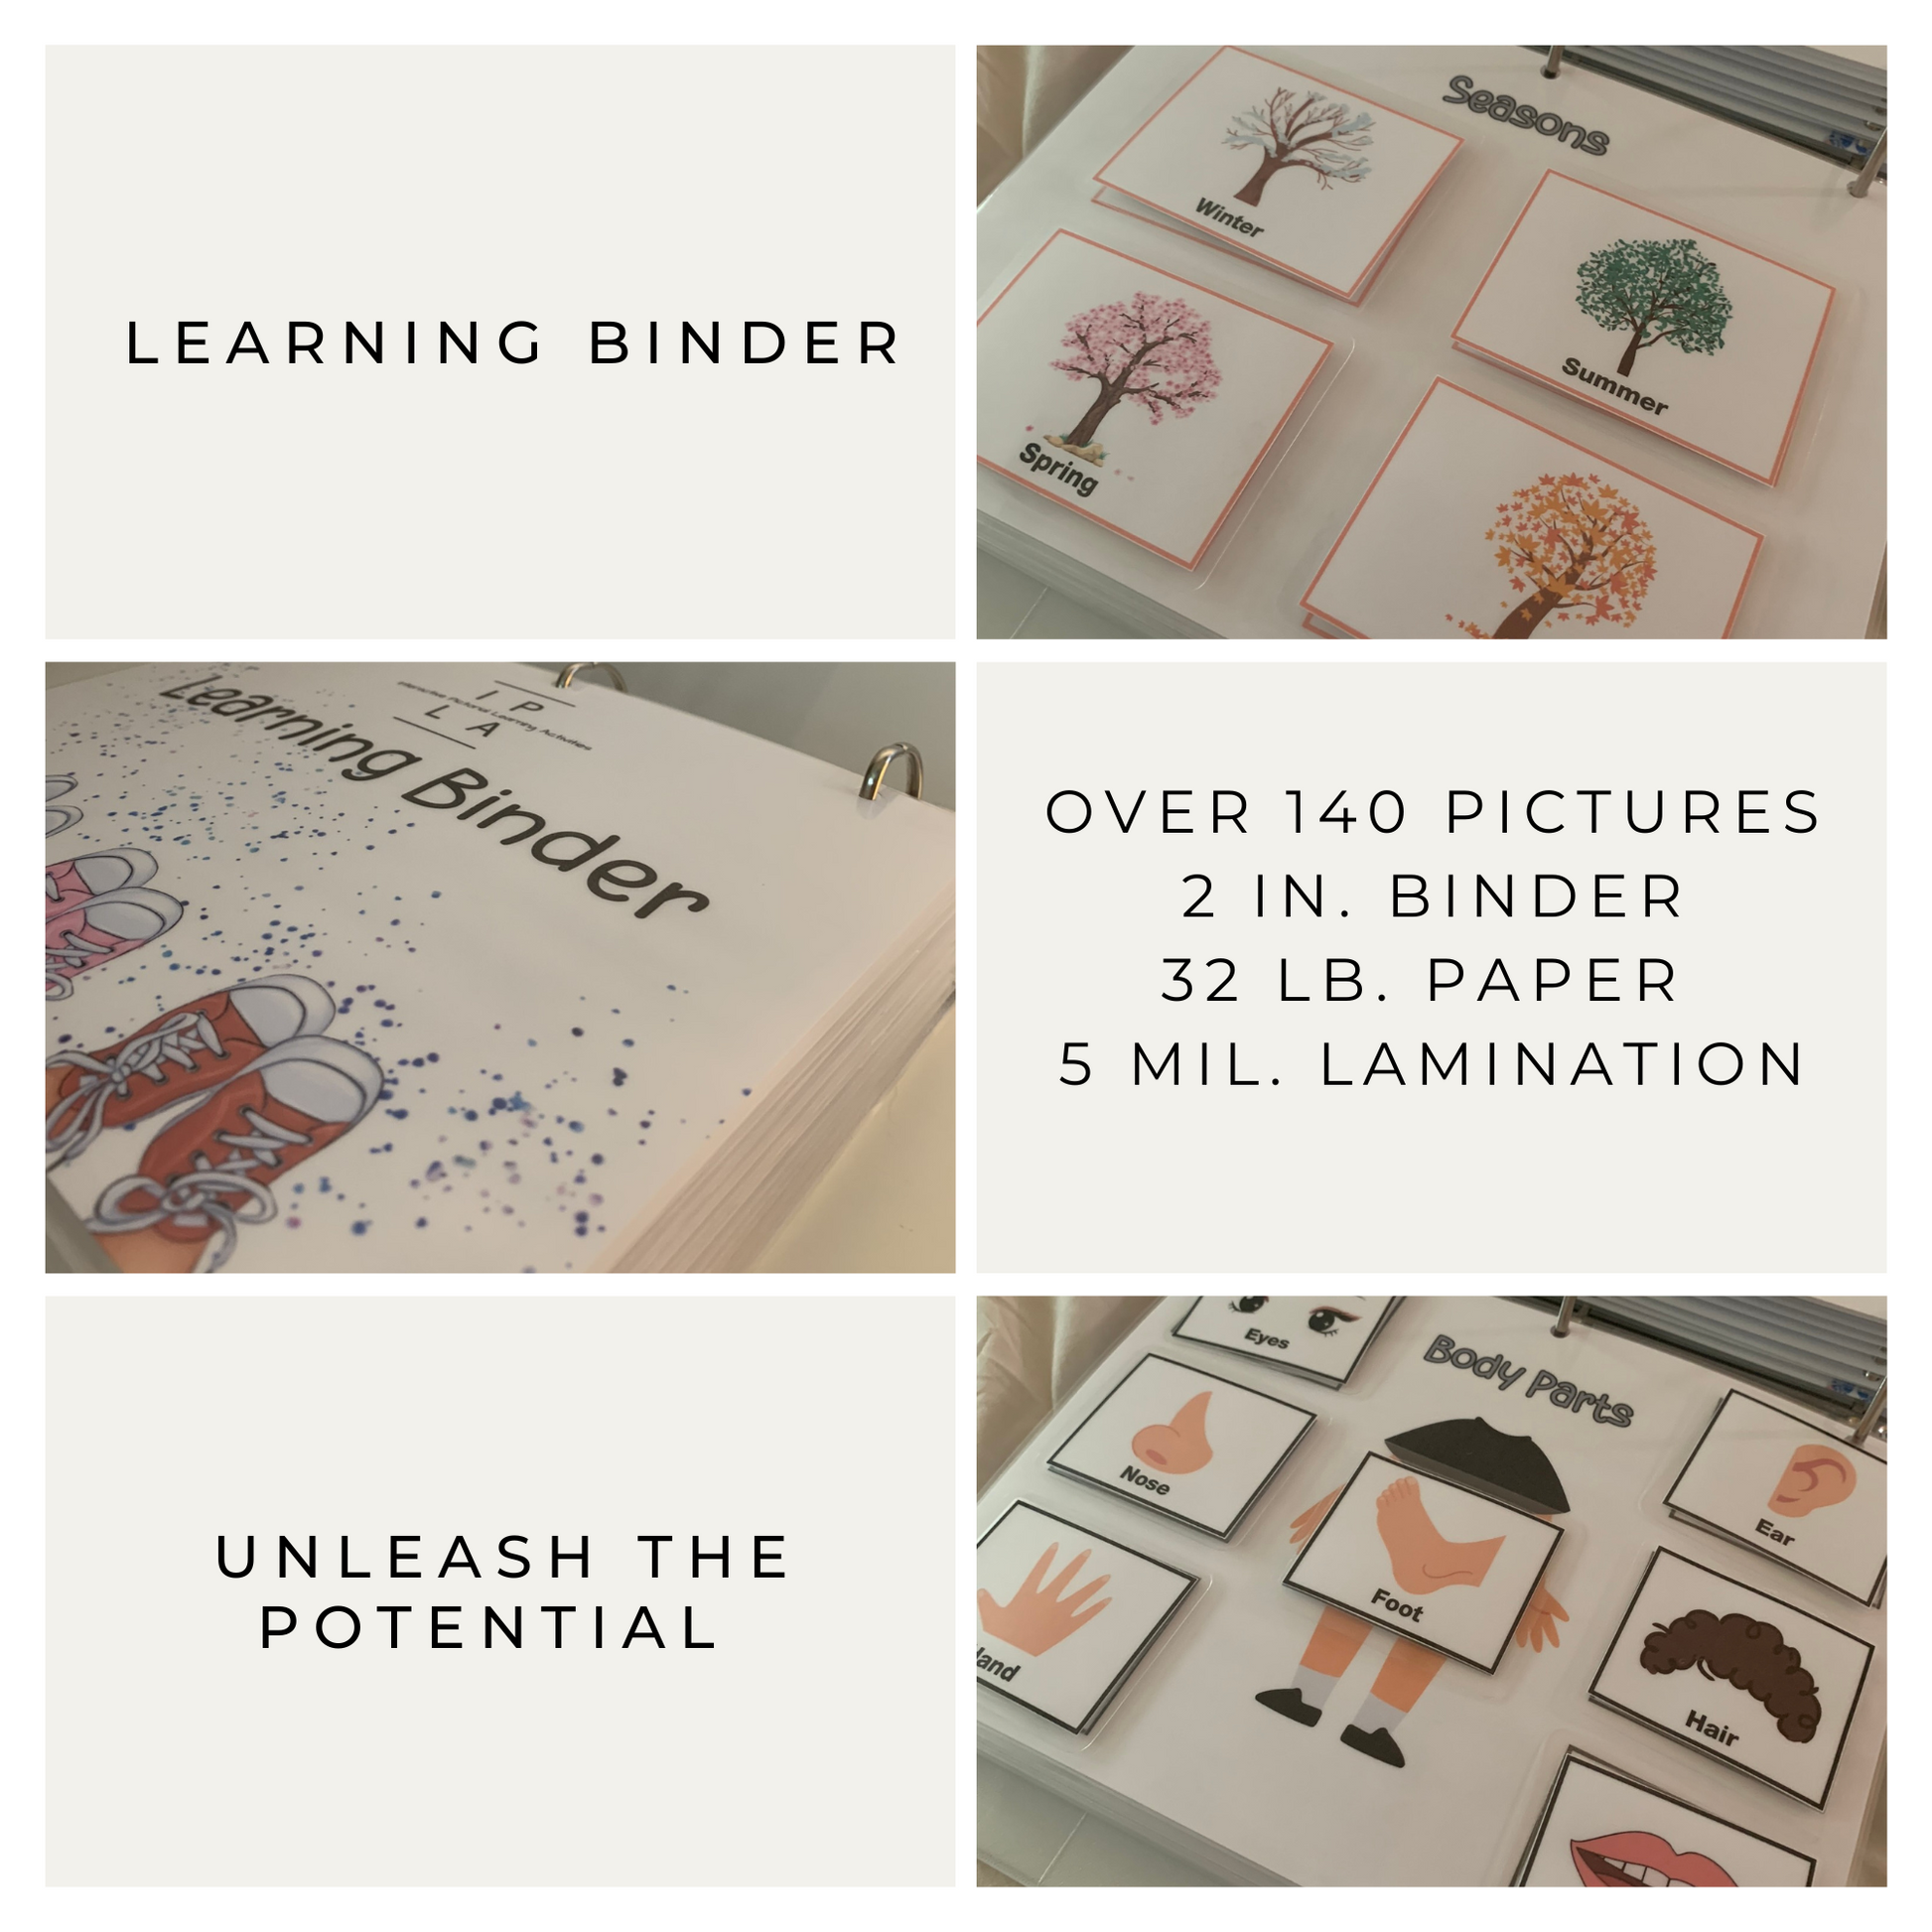 Explore IPLActivities learning binders|16 engaging activities, 140+ pictures including 8 from complementary task analysis activities to spark exploration and growth! The binder is 2 inches and the paper is 32 lb. enclosed in 5 mil lamination for durability.